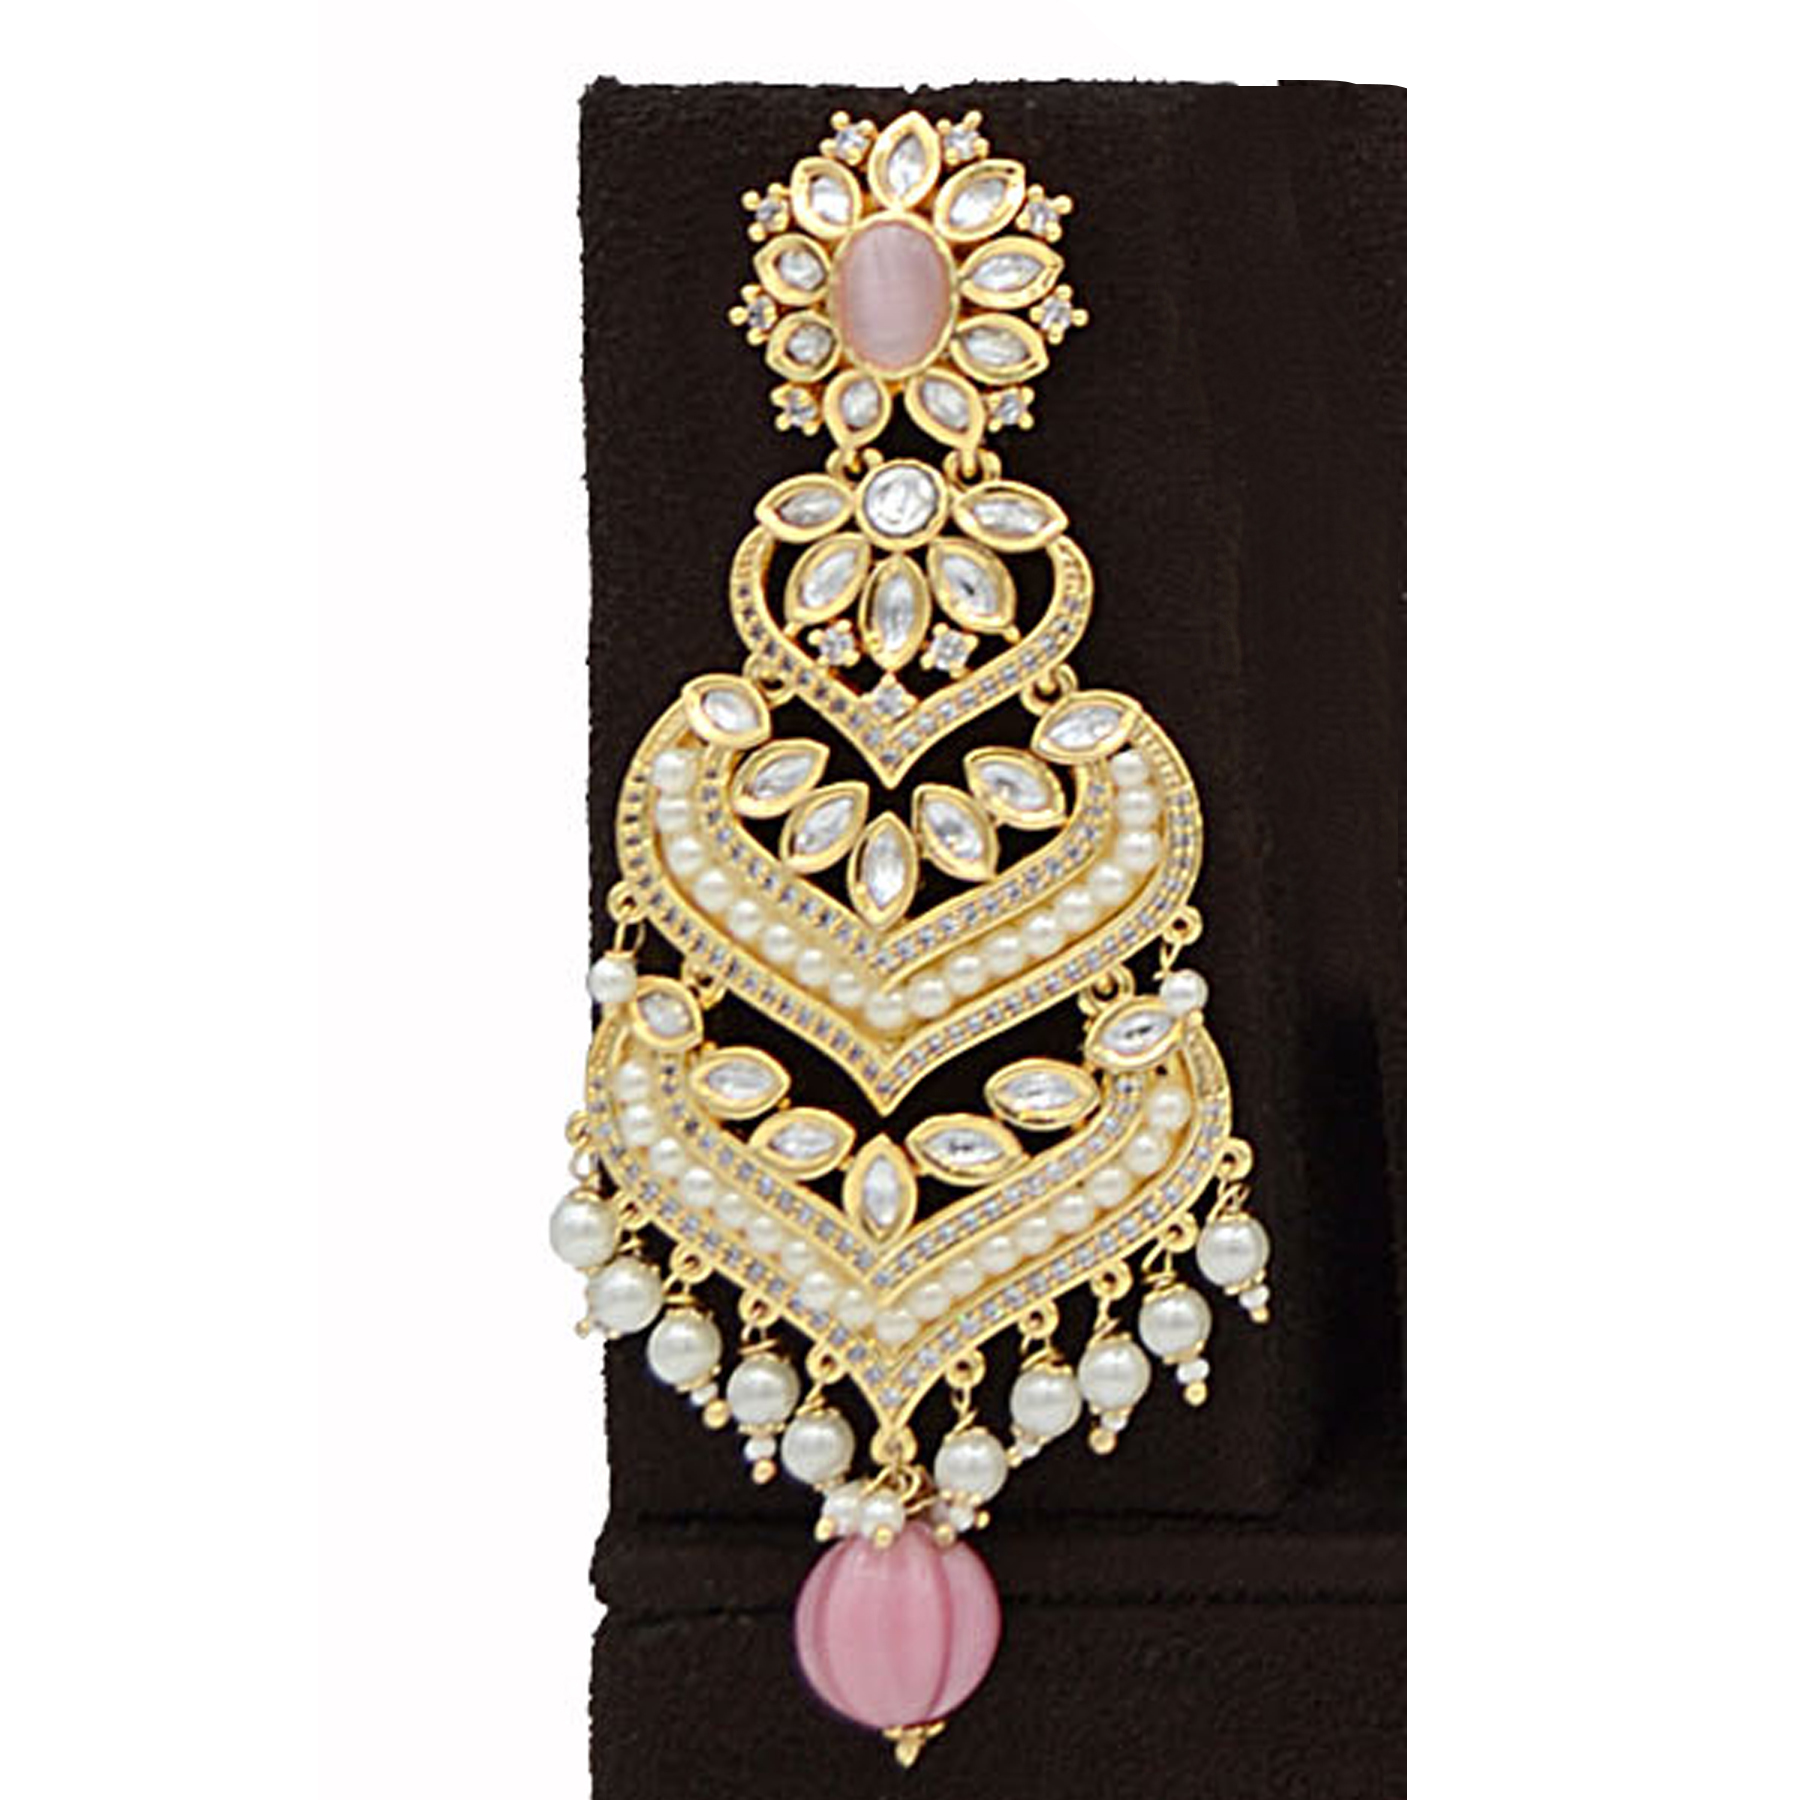 Kundan Necklace Set with Mint Pink stones